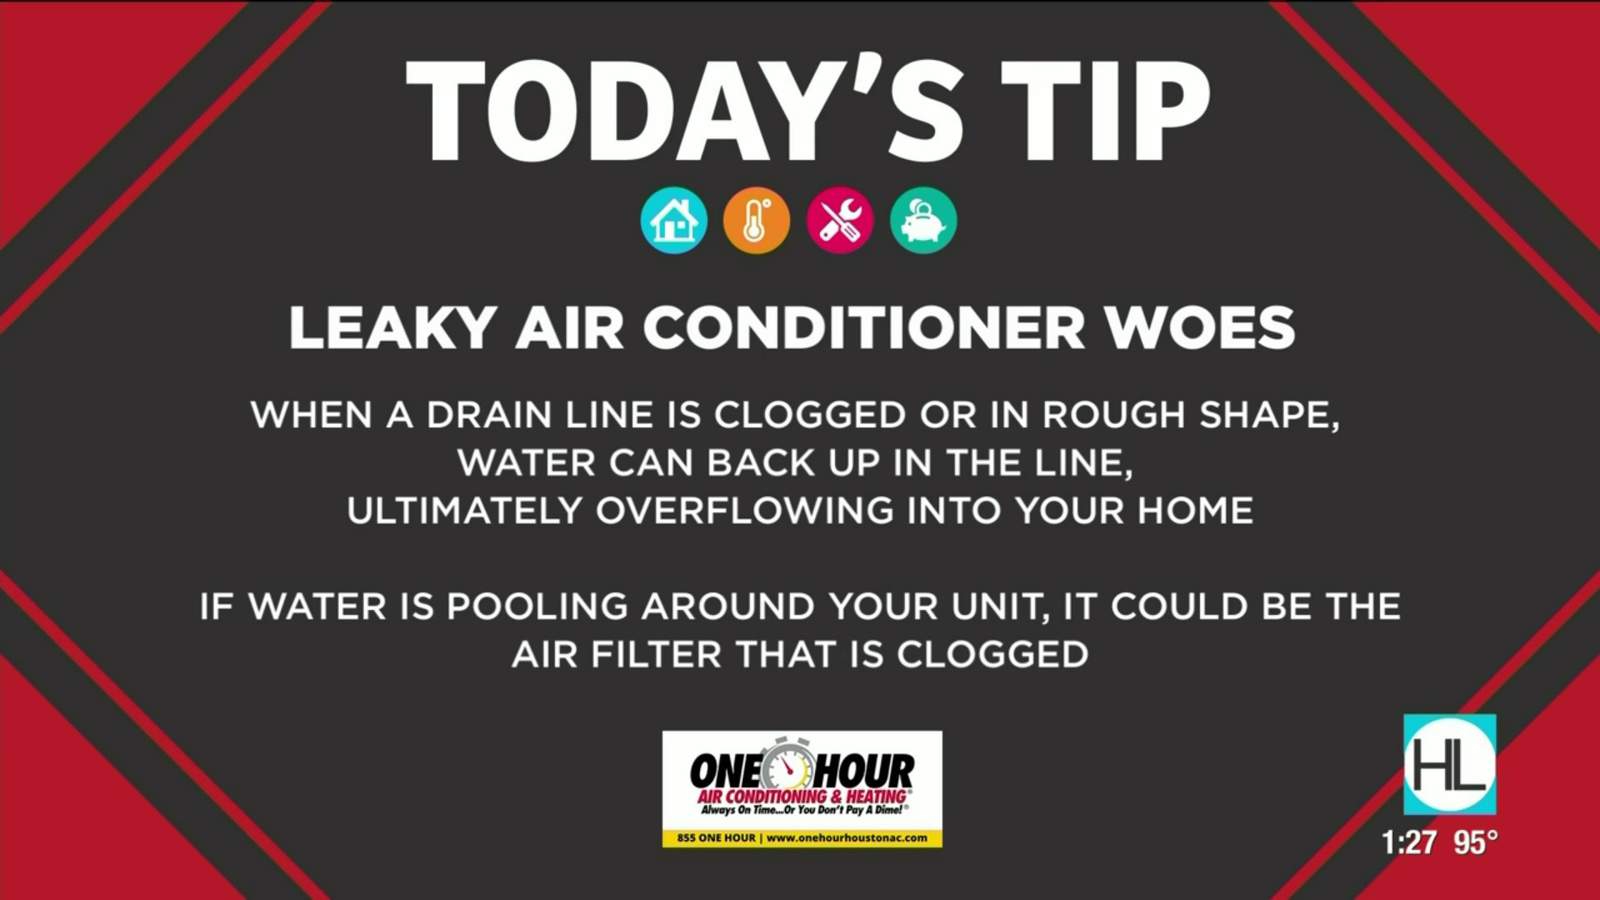 Tip Tuesday: Leaky air conditioner woes